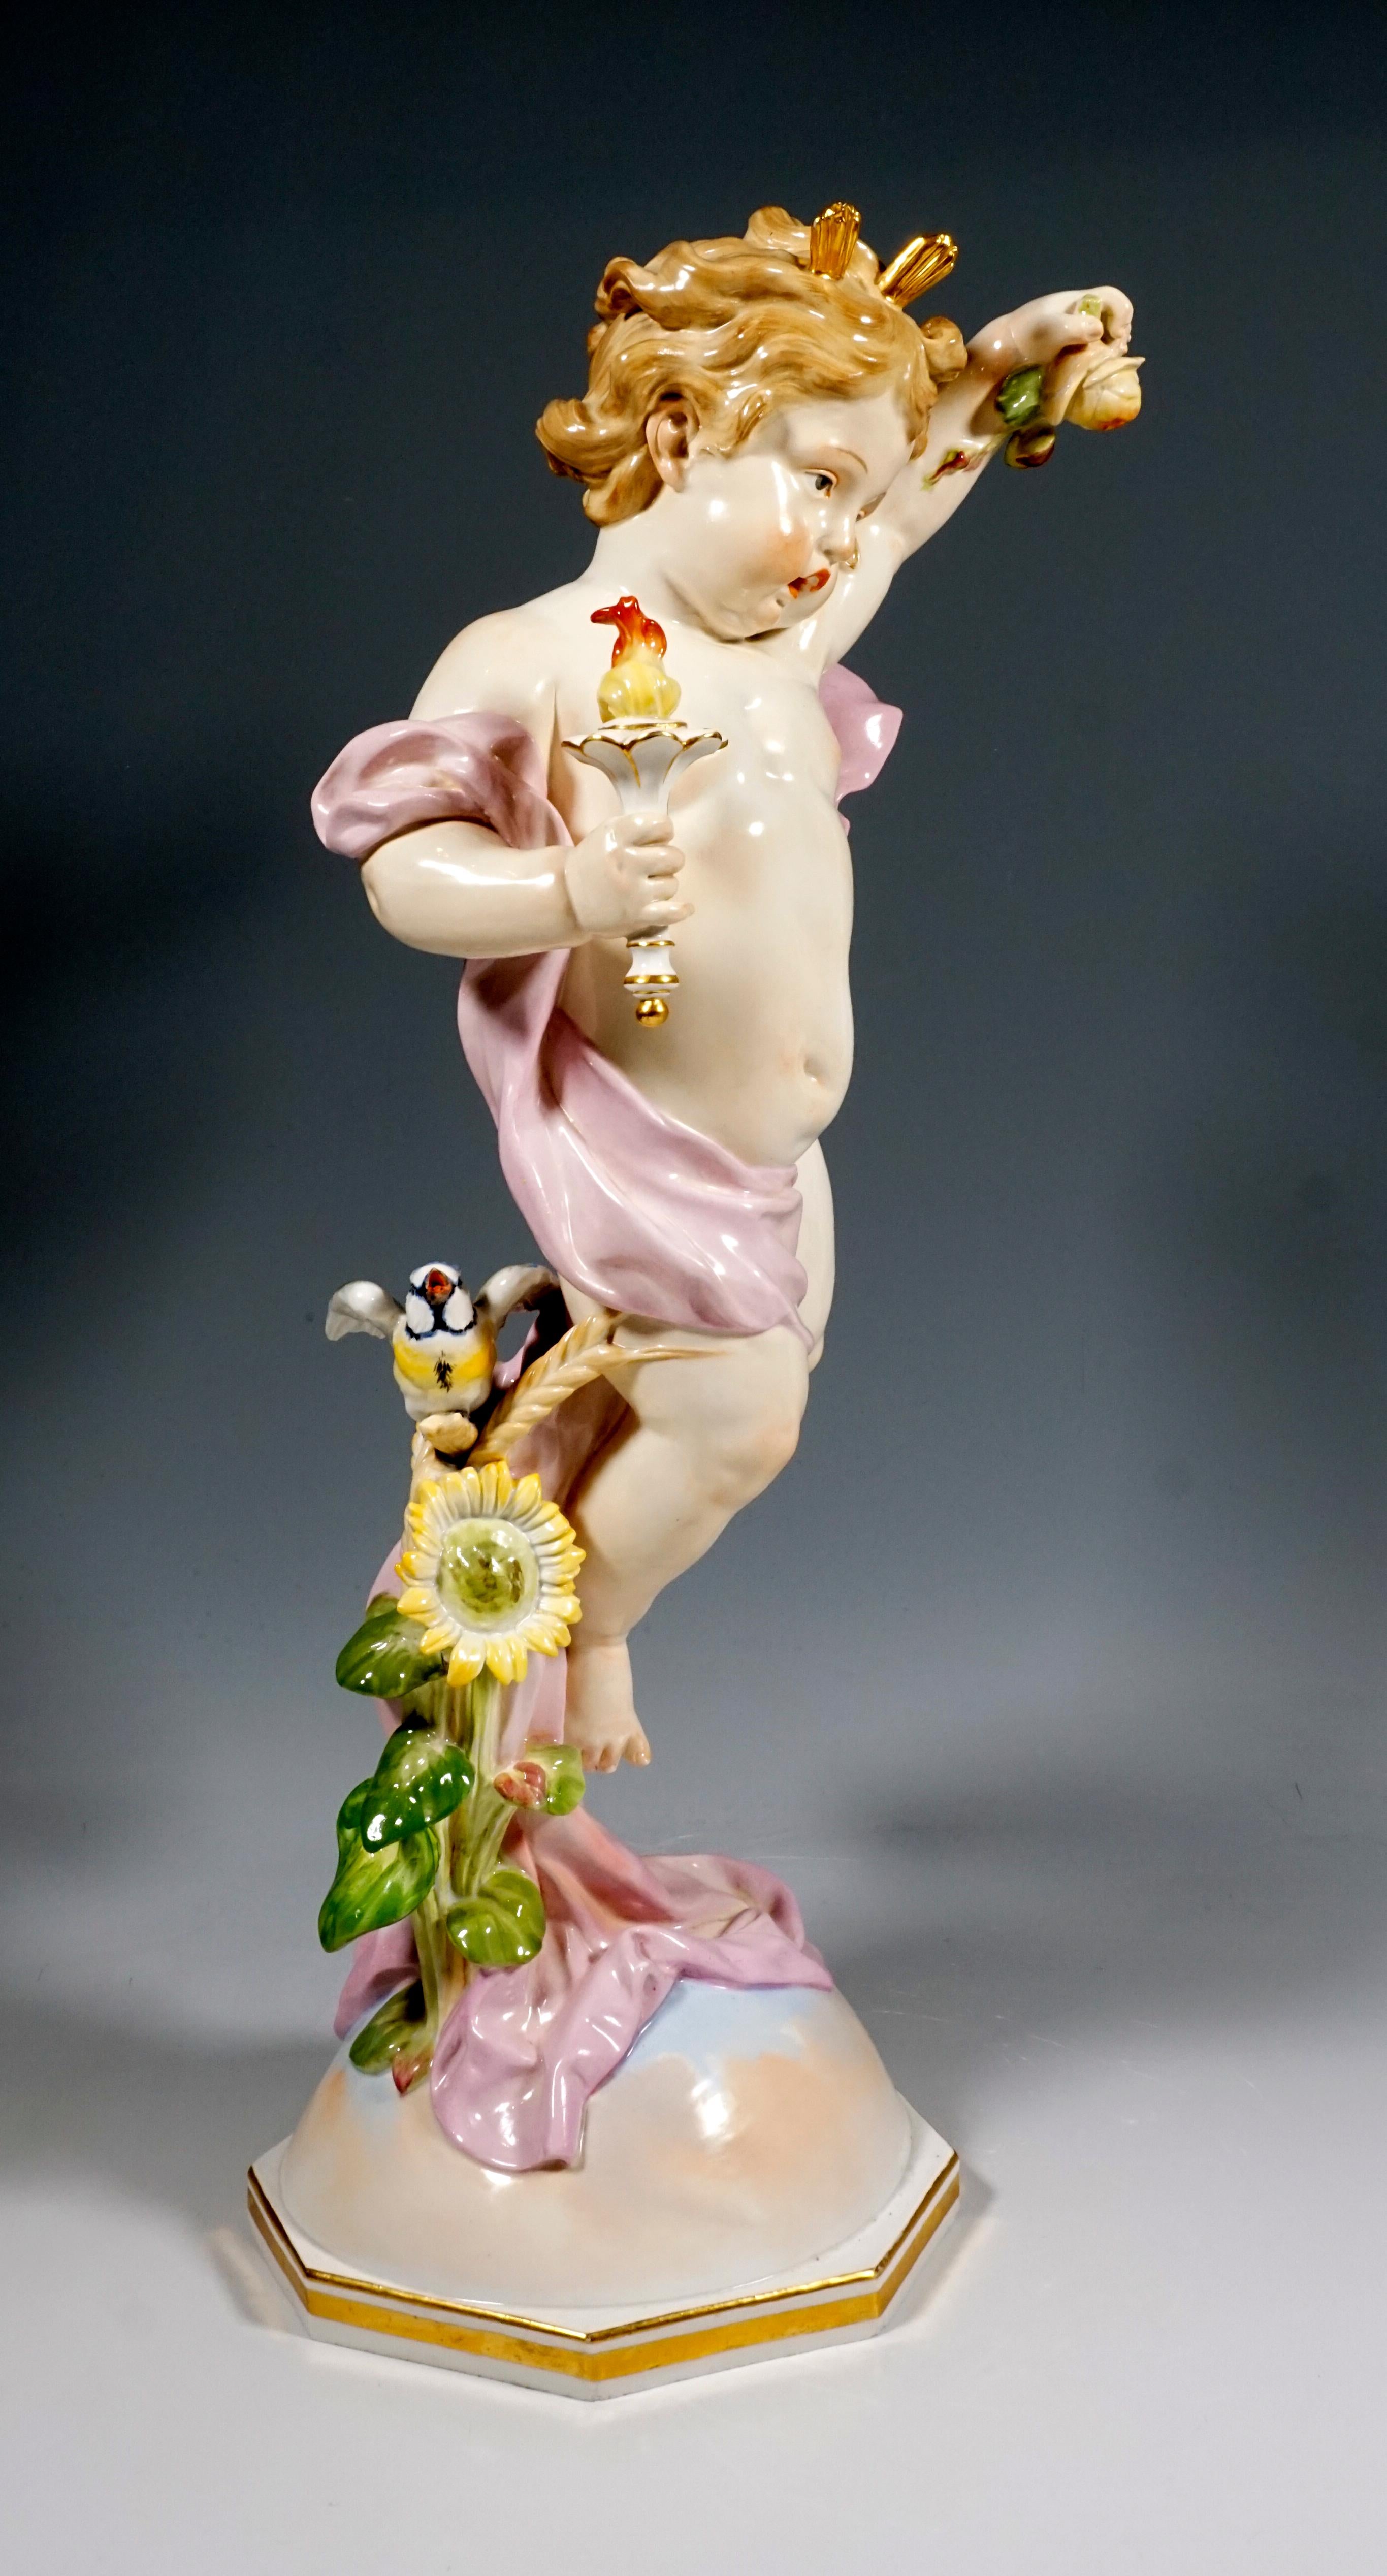 Hand-Crafted Large Meissen Pair Of Figures, 'Day & Night' by Heinrich Schwabe, circa 1890